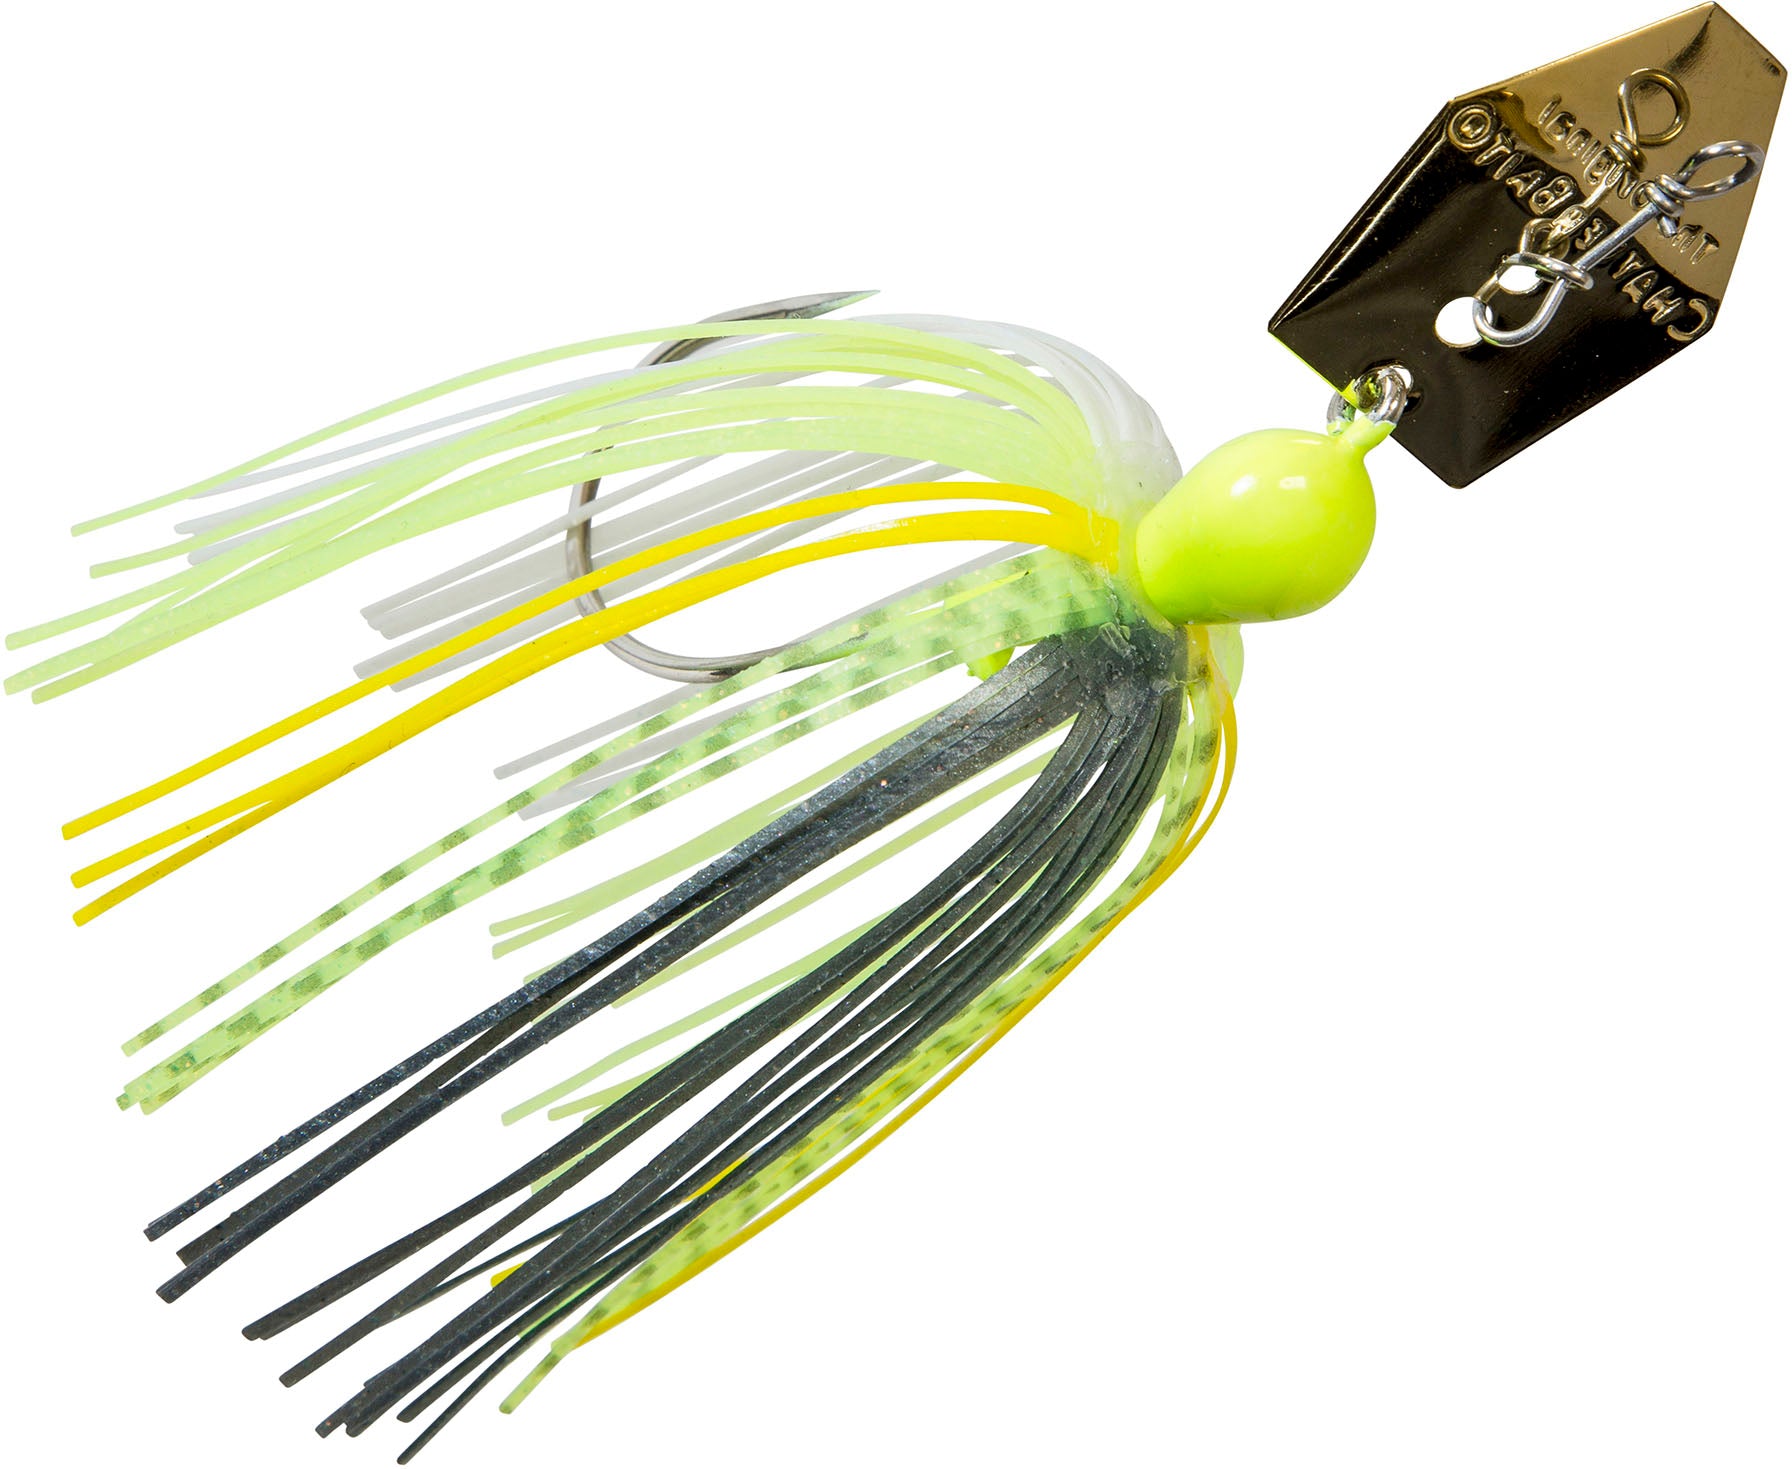 Weedless Chatter Bait Elite Lures 10.8cm/19g Bladed Jig Skirted Swim Jigs Bass  Baits High Quality Fishing Lure Wobblers